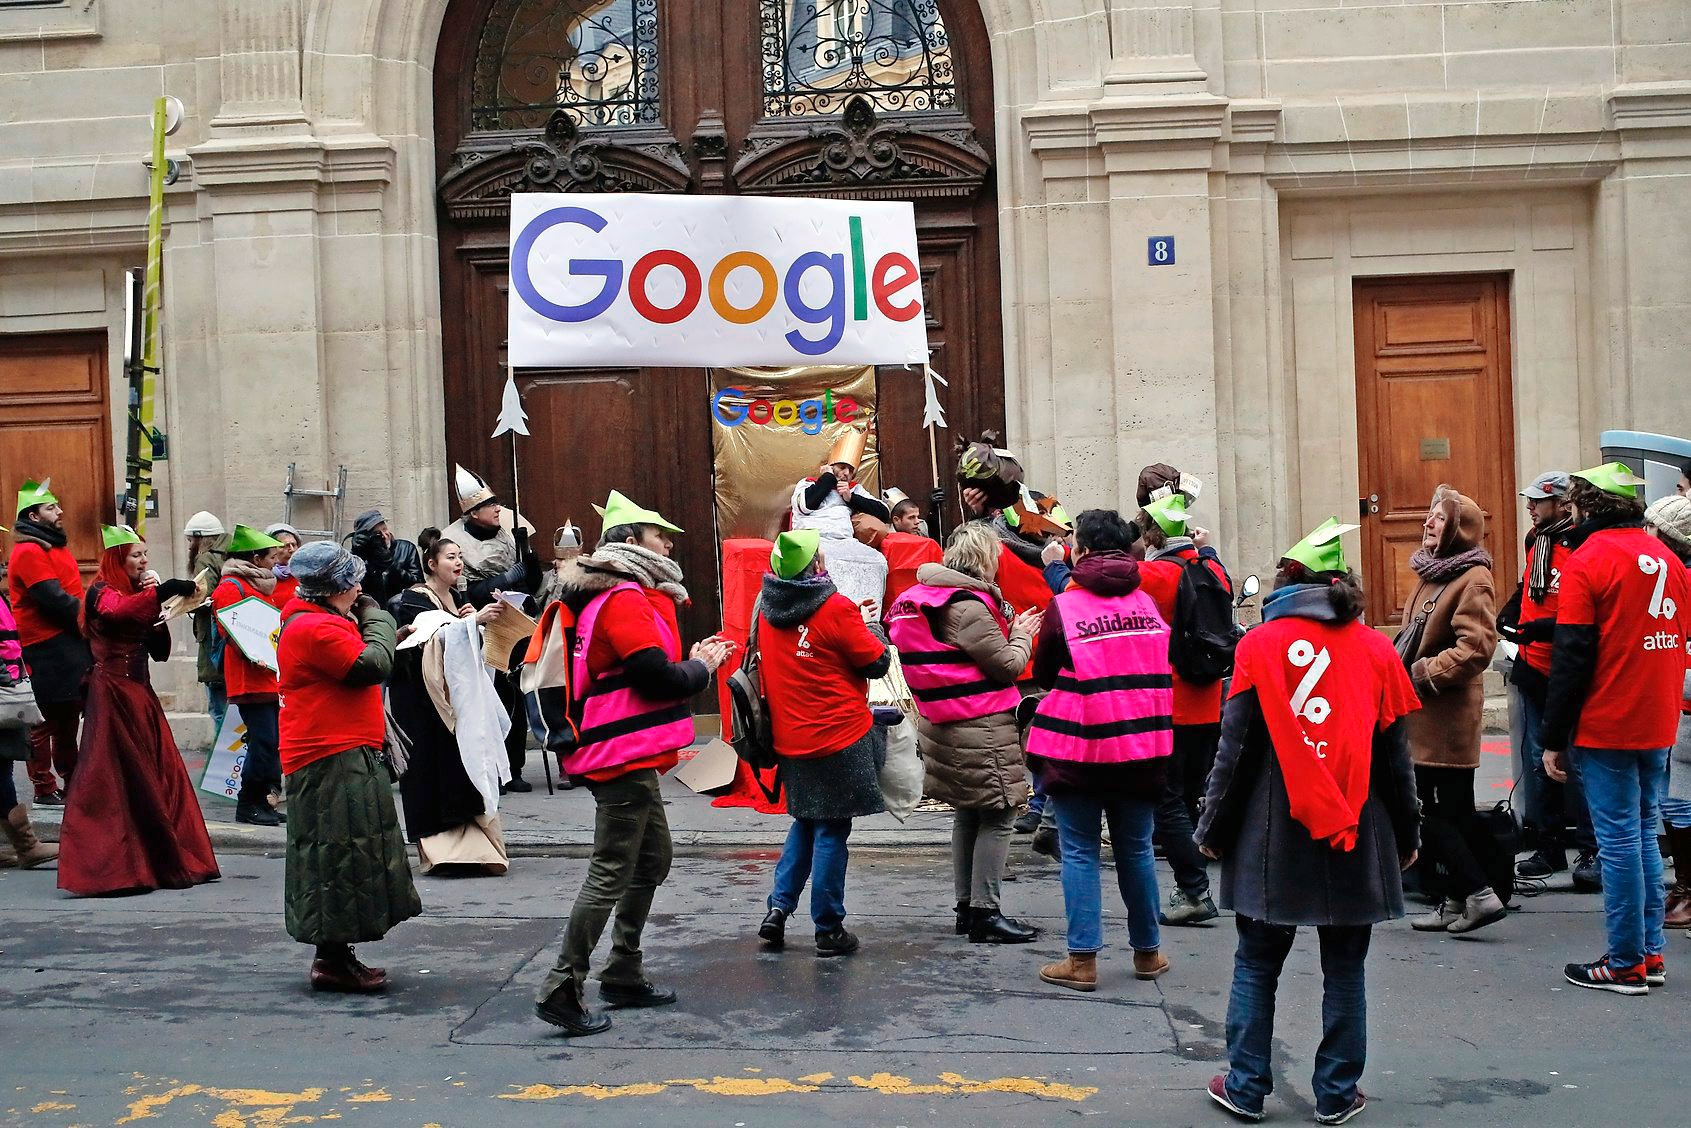 Activists from anti-globalization organisation Attac stage a protest at Google's Paris headquarters to criticize the company's tax evasion policies, in Paris, Thursday, Jan. 31, 2019. According to Attac, Google's French subsidiary reported revenue of 325 million euros (371 million dlrs) in 2017 and paid 14 million euros (16 million dlrs) in income tax. The group says Google France shifts more than 85 percent of its French revenue to countries with more favorable tax regimes. France's finance minister Bruno Le Maire earlier this month announced plans to tax multinational technology companies such as Google with a turnover of more than 750 million euros worldwide and 25 million euros in France. (AP Photo/Francois Mori) FRANCE GOOGLE PROTEST